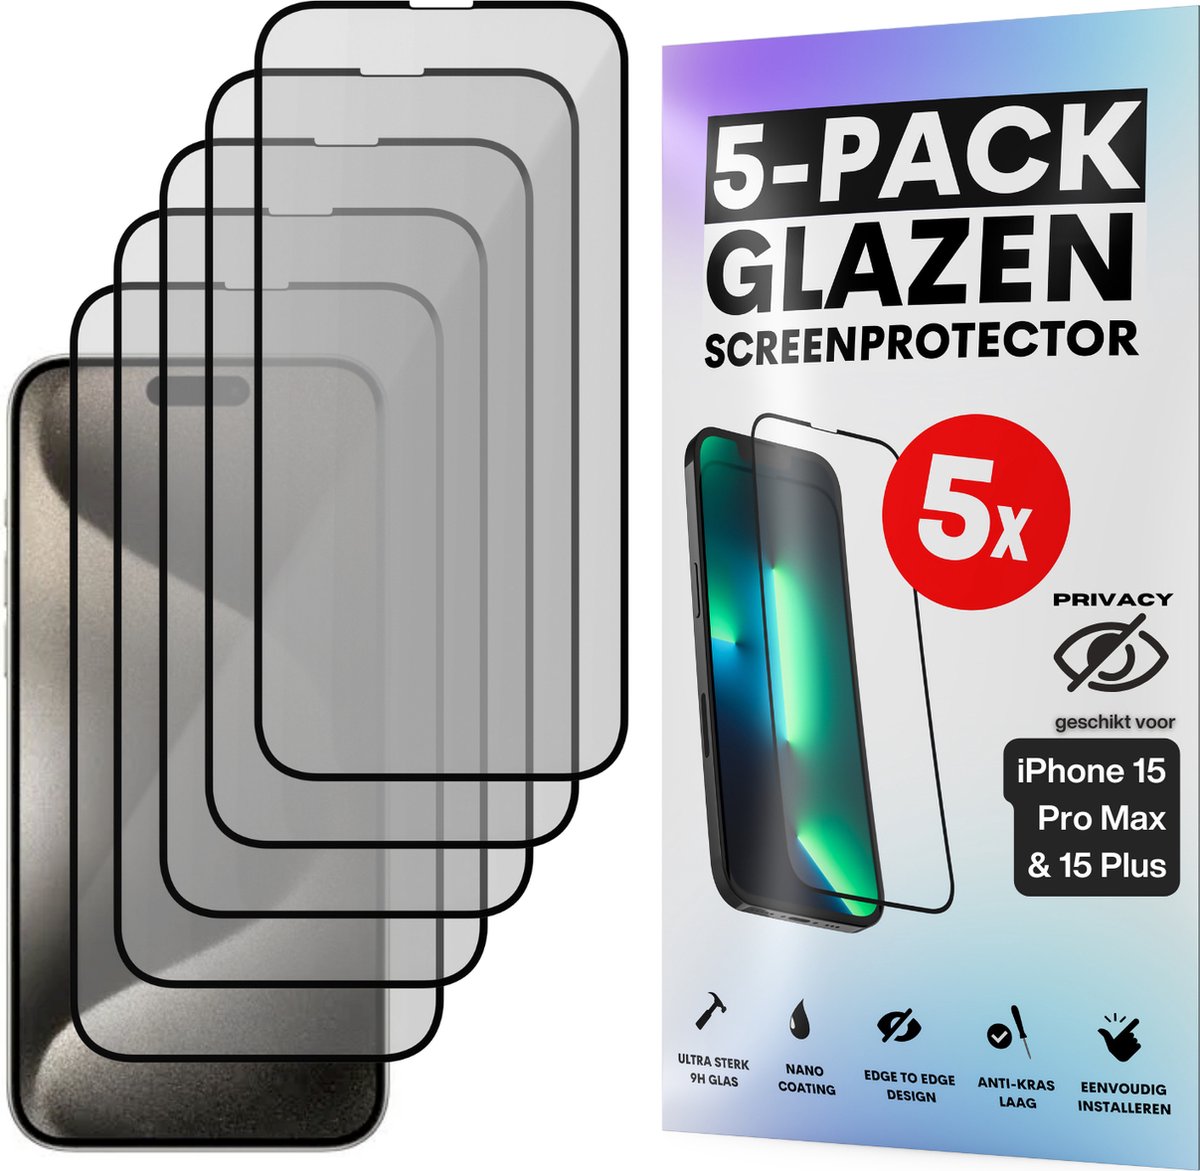 Privacy Screenprotector - Geschikt voor iPhone 15 Pro Max / 15 Plus - Gehard Glas - Full Cover Tempered Privacy Glass - Case Friendly - 5 Pack